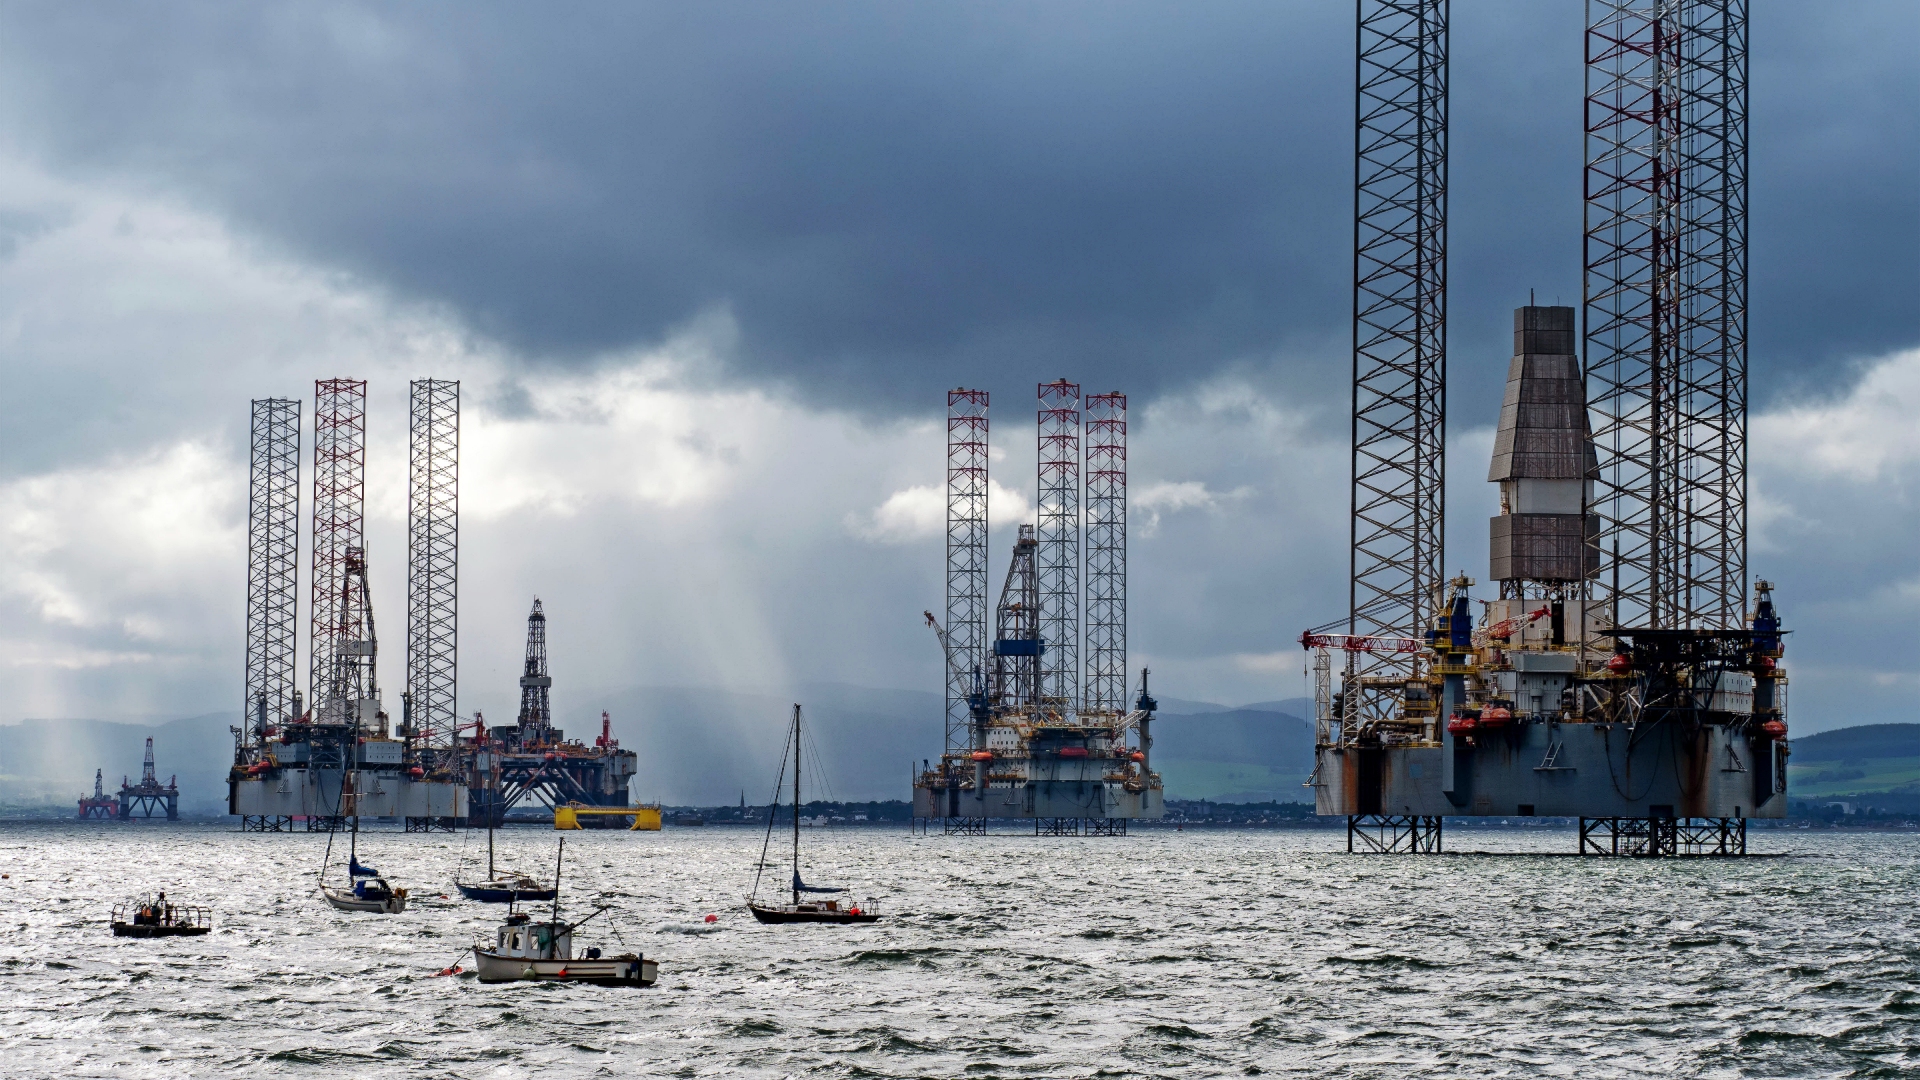 Oil rigs moored in the shallow waters of the Cromarty Firth in Scotland.